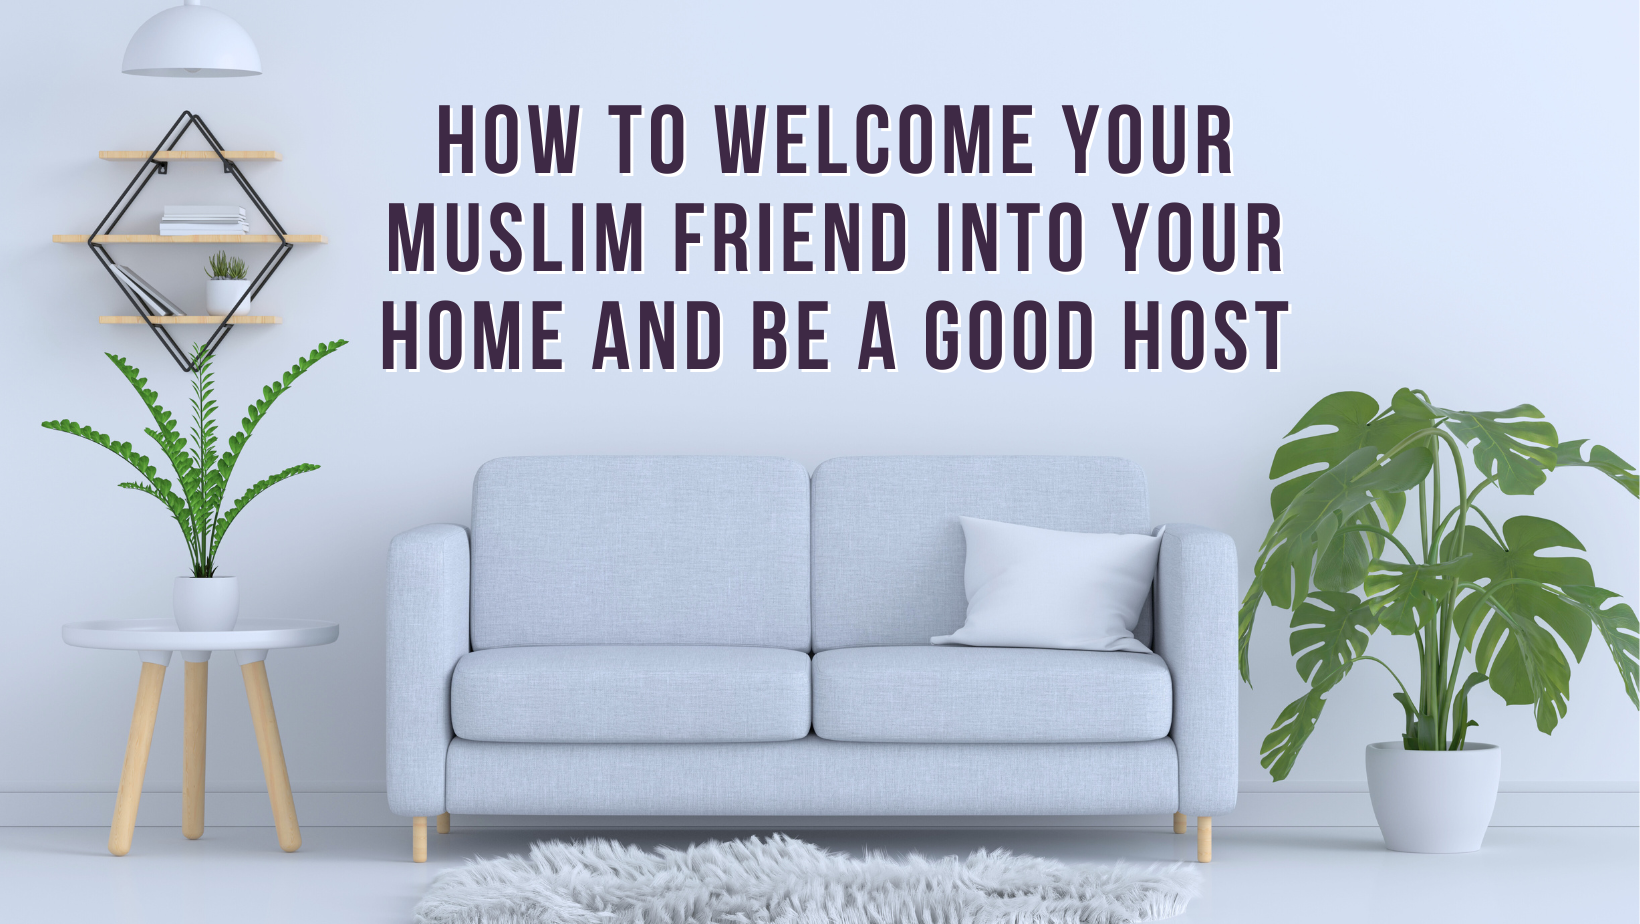 How to welcome your Muslim friend into your home and be a good host